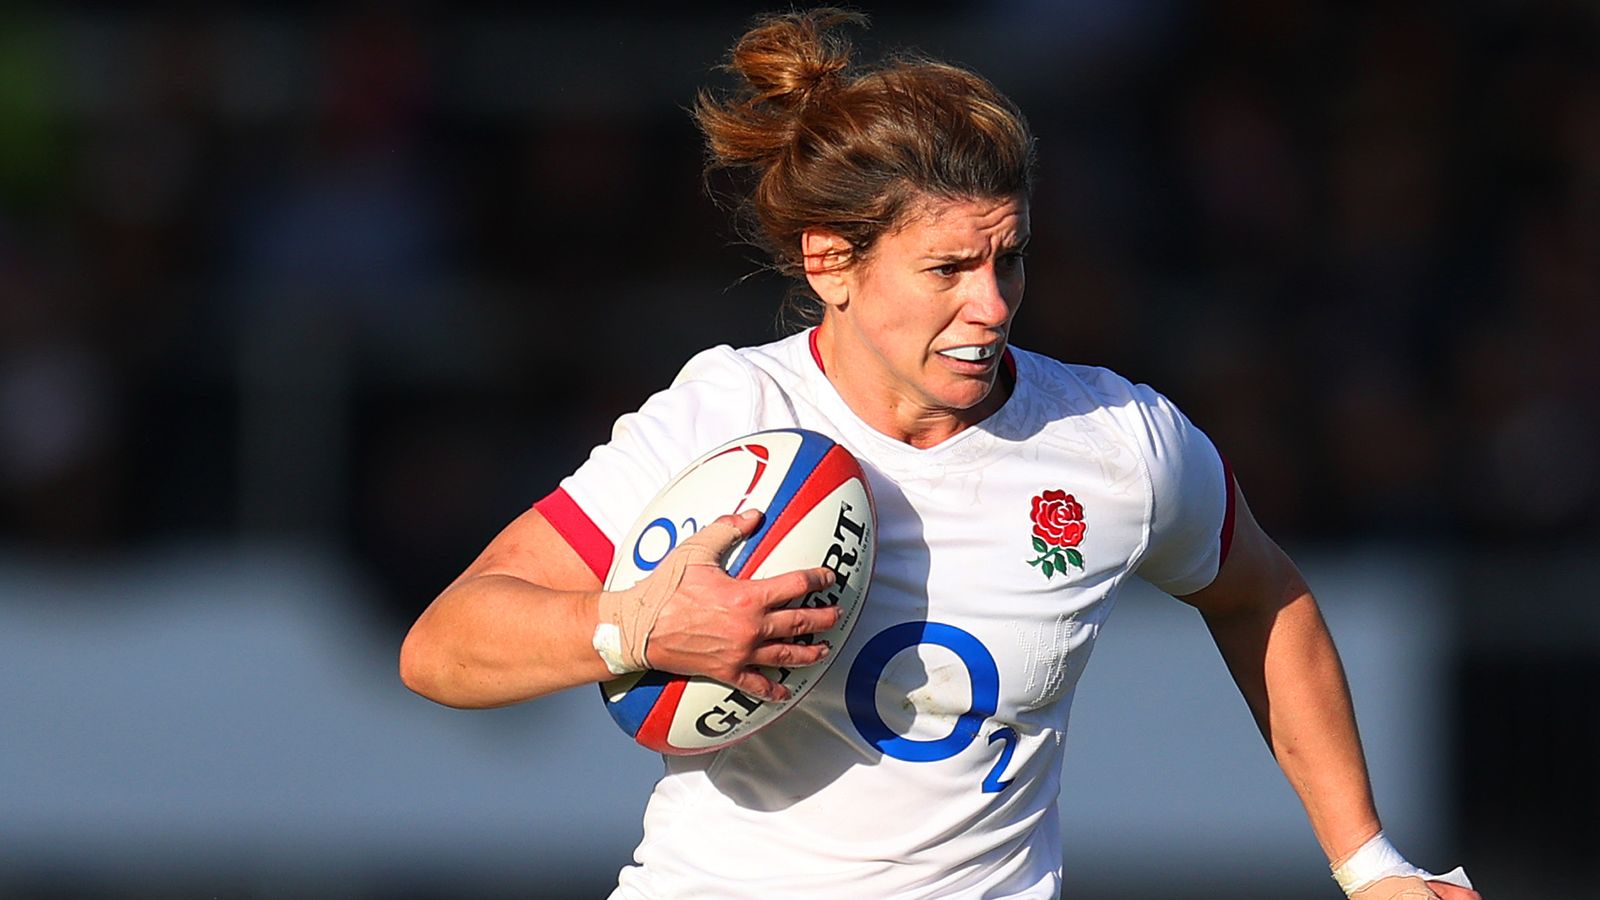 Women’s Rugby World Cup: England announce 32-player squad led by captain Sarah Hunter